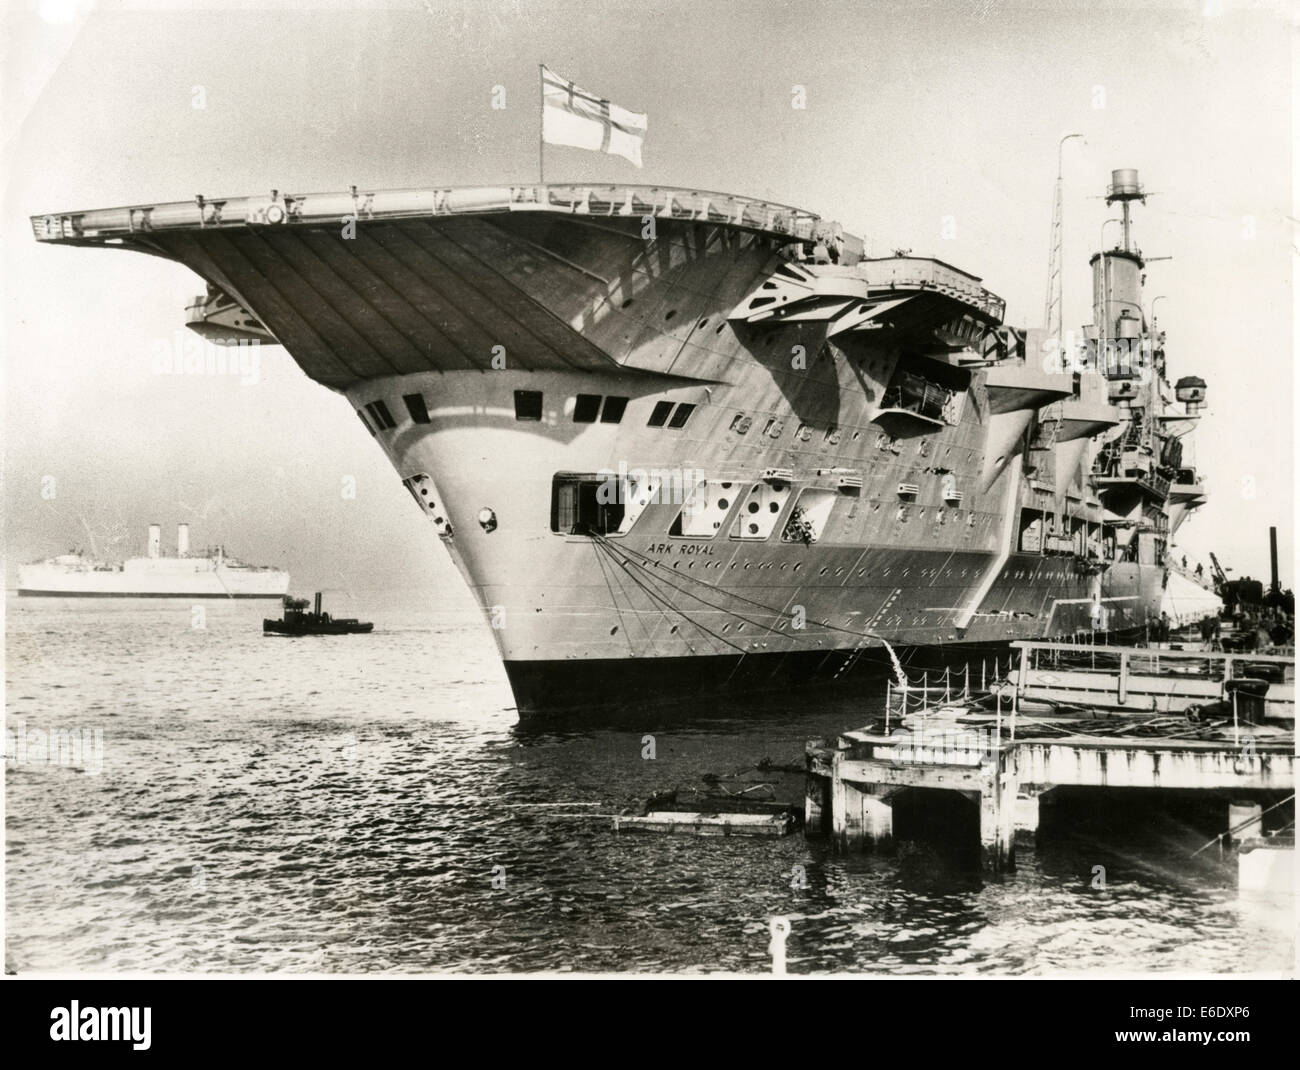 British Aircraft Carrier, HMS, Ark Royal, Docked at Pier, Porsmouth, England, 1939 Stock Photo